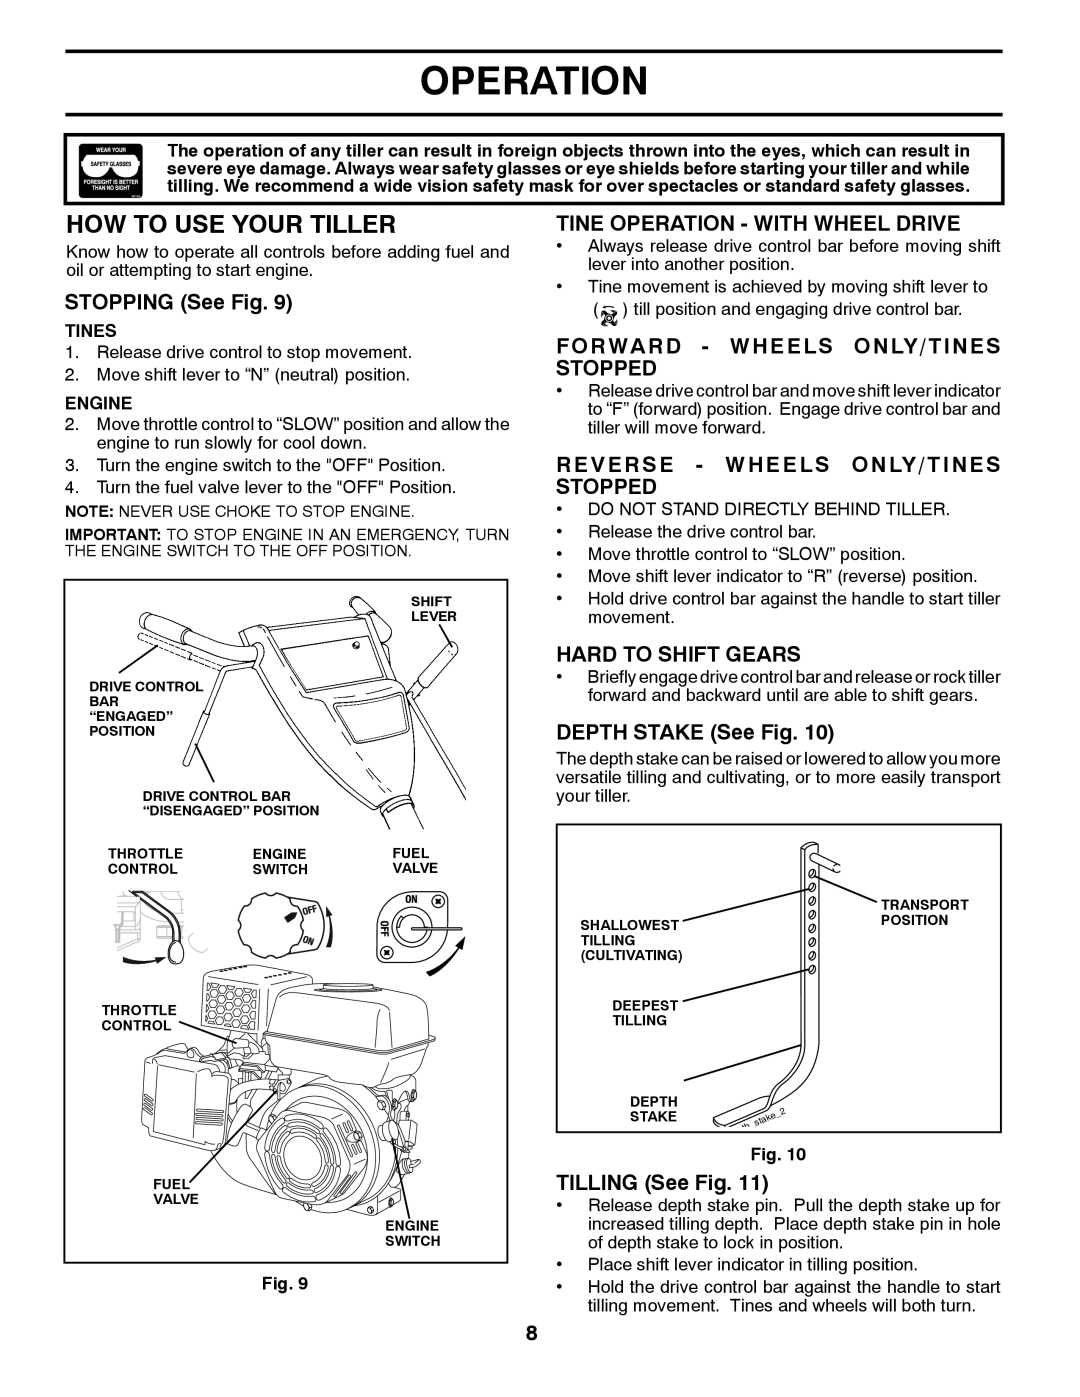 Poulan PRRT900 manual How To Use Your Tiller, STOPPING See Fig, Tine Operation - With Wheel Drive, Hard To Shift Gears 